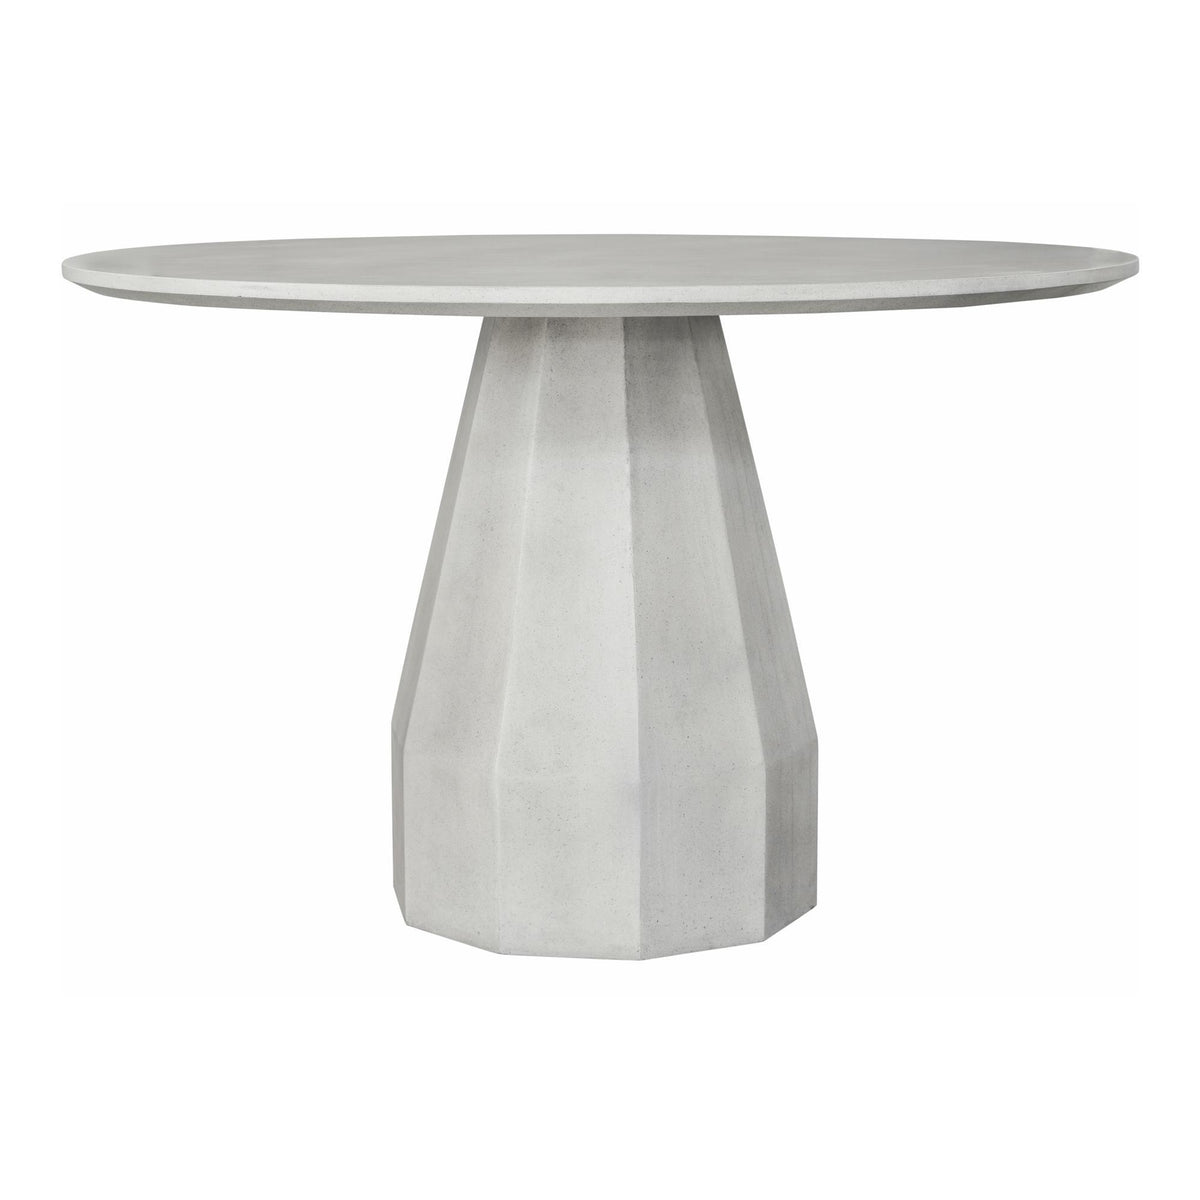 Moe's Home Collection Templo Outdoor Dining Table Antique White - JK-1010-18